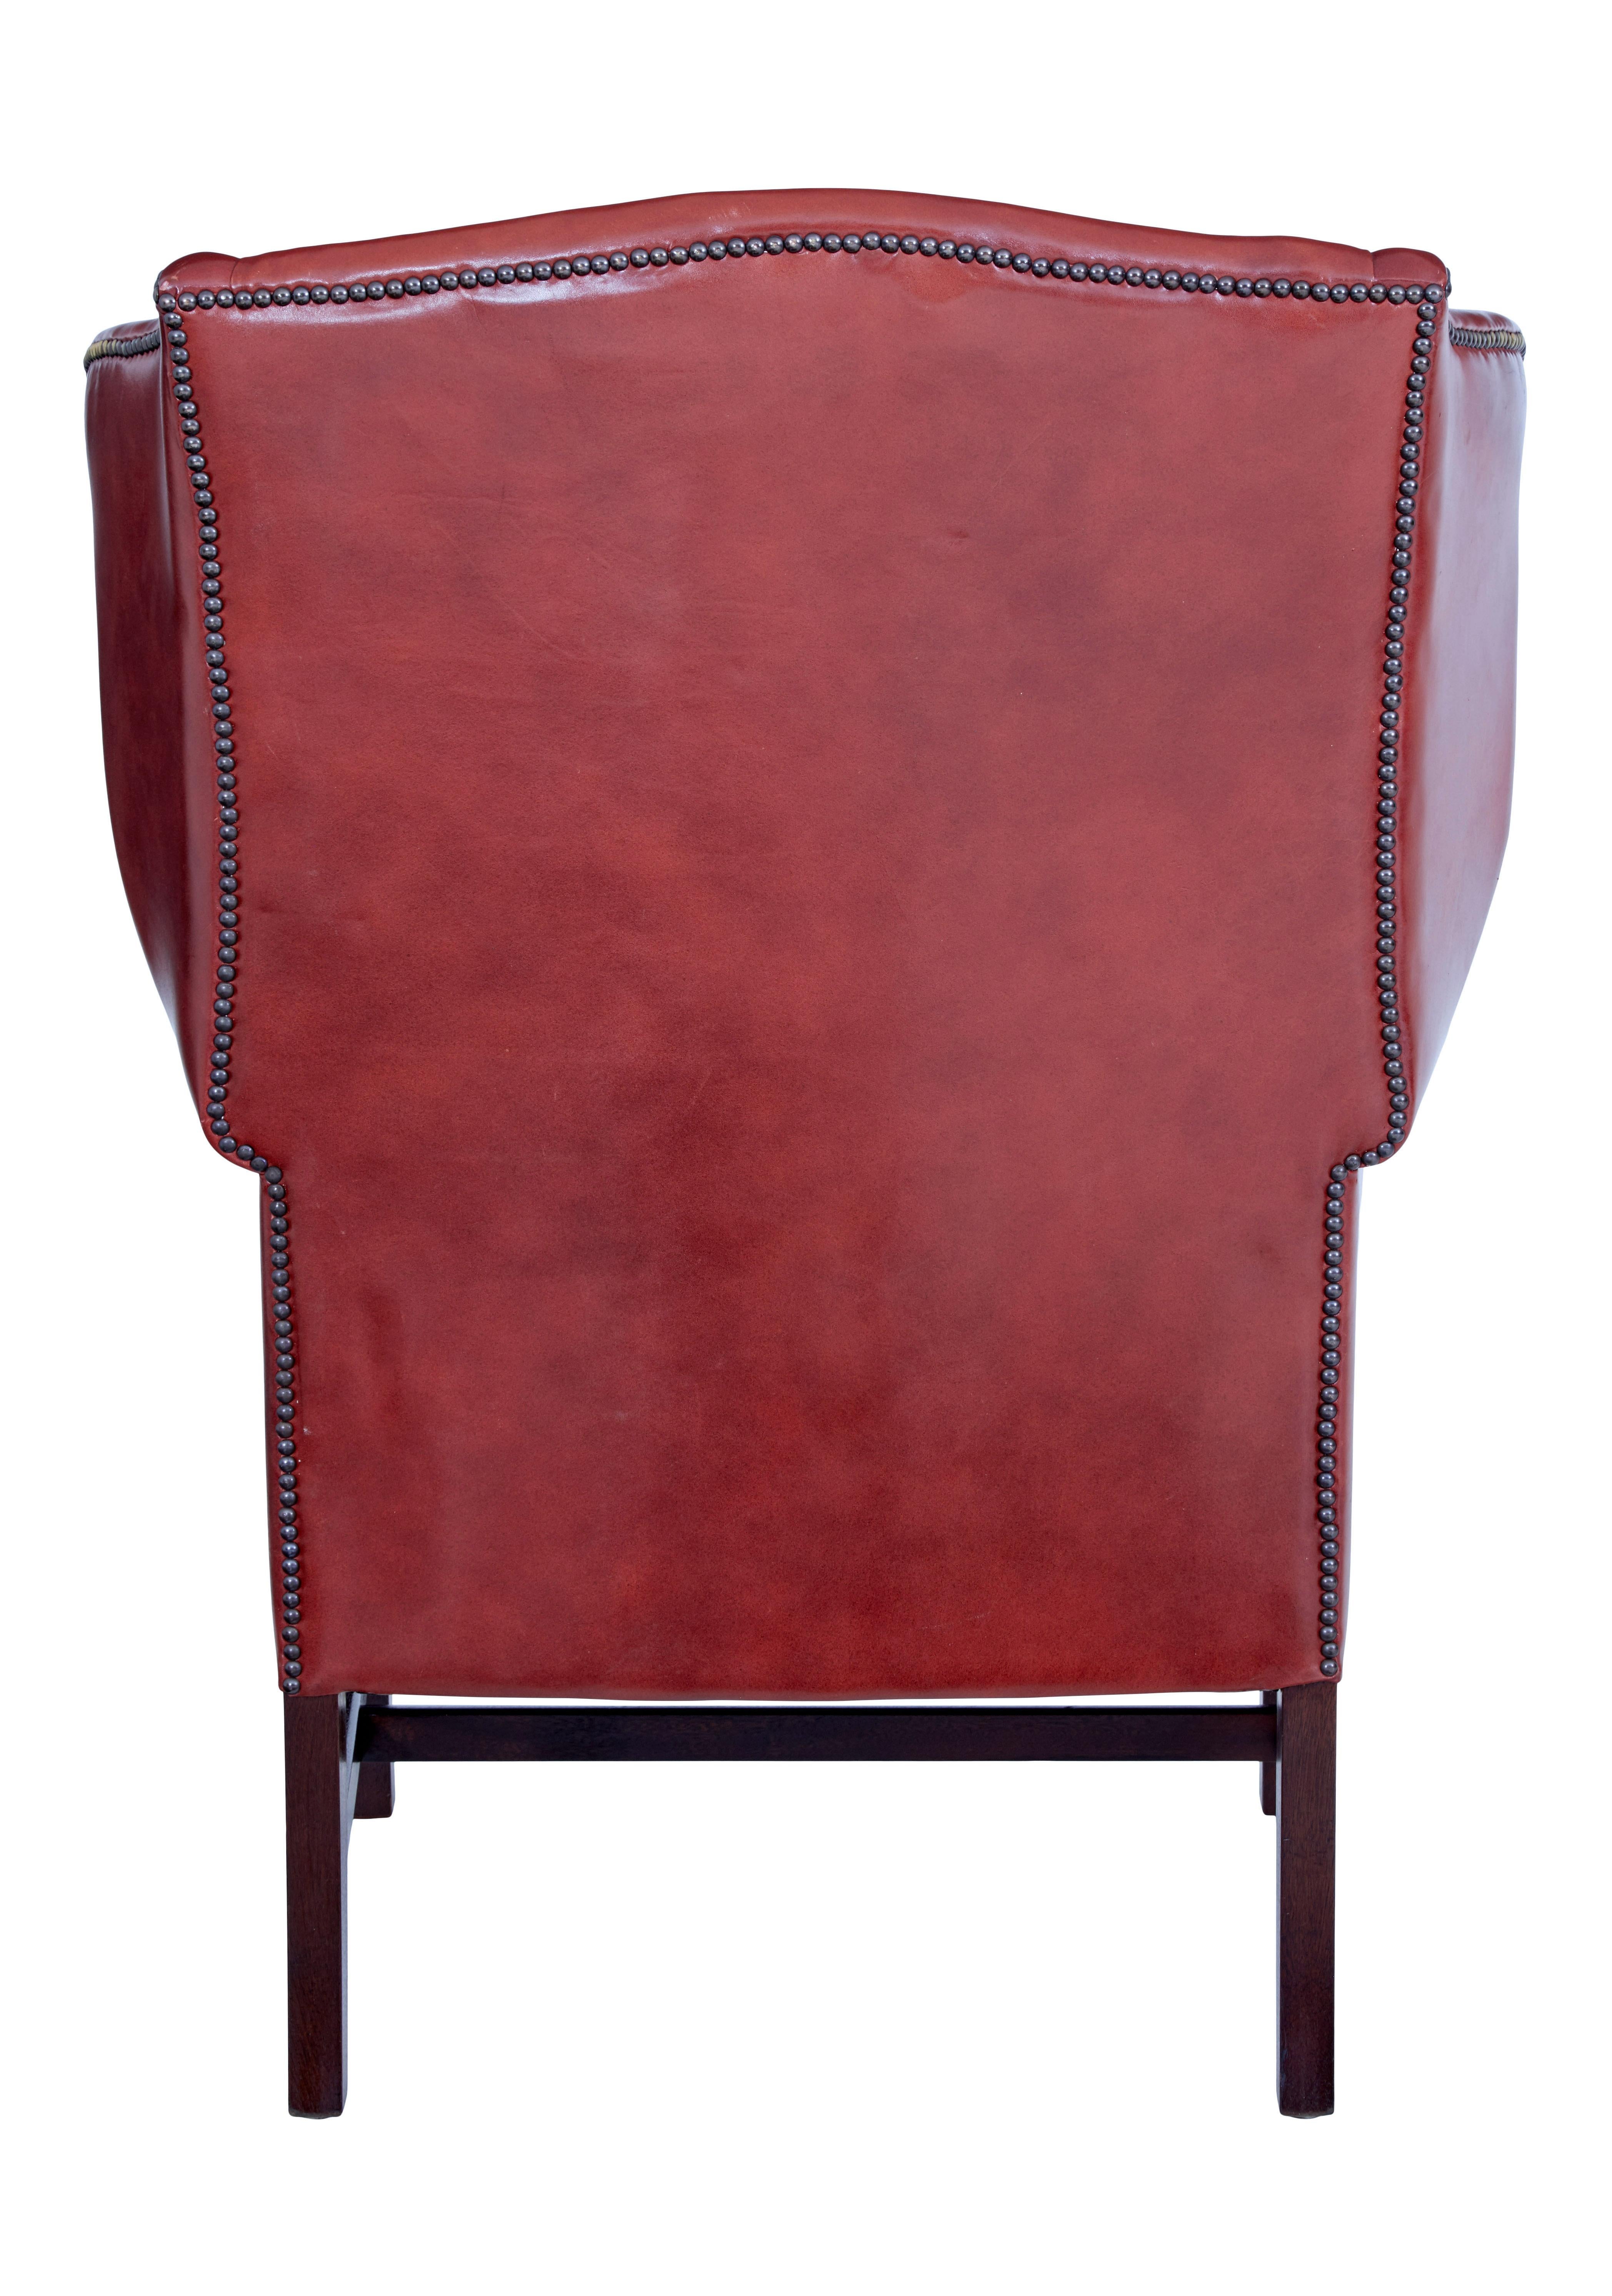 English Mid 20th century leather wingback armchair For Sale